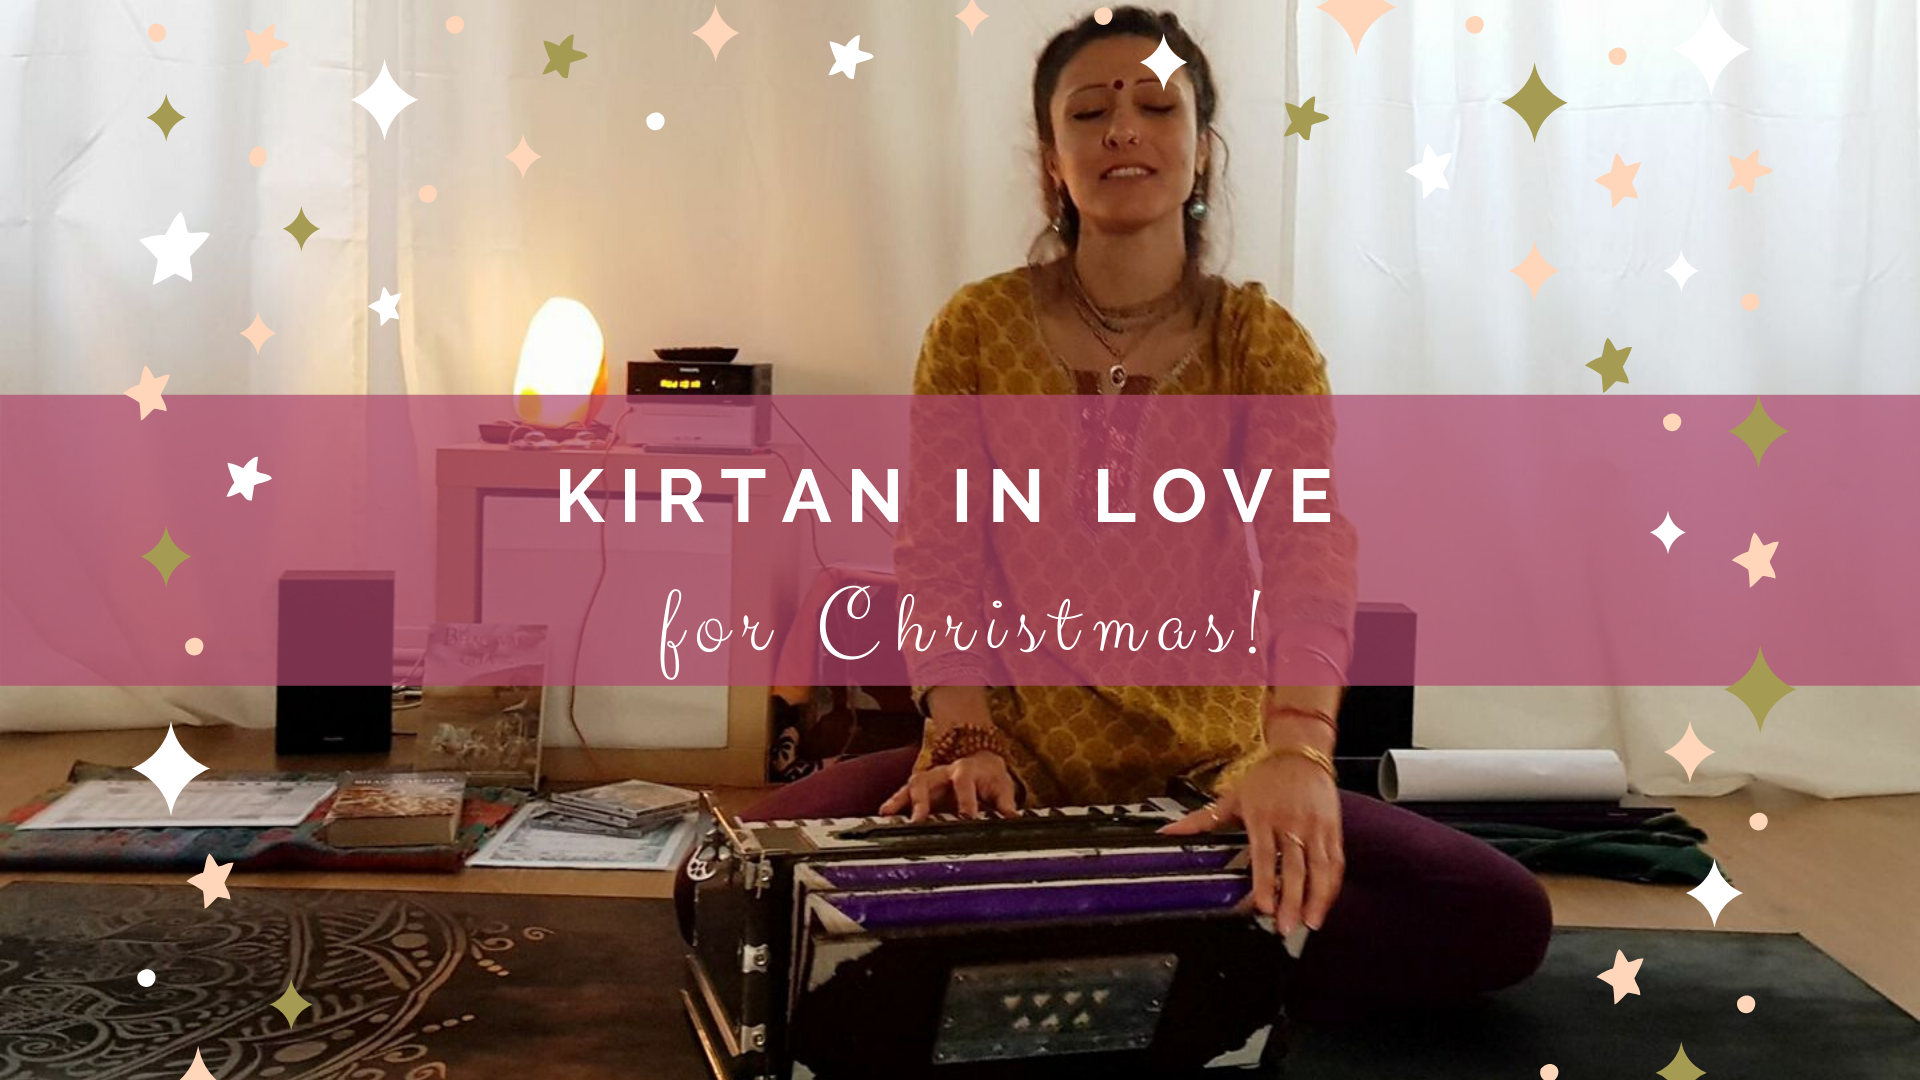 21 dicembre: Kirtan in love for Christmas!